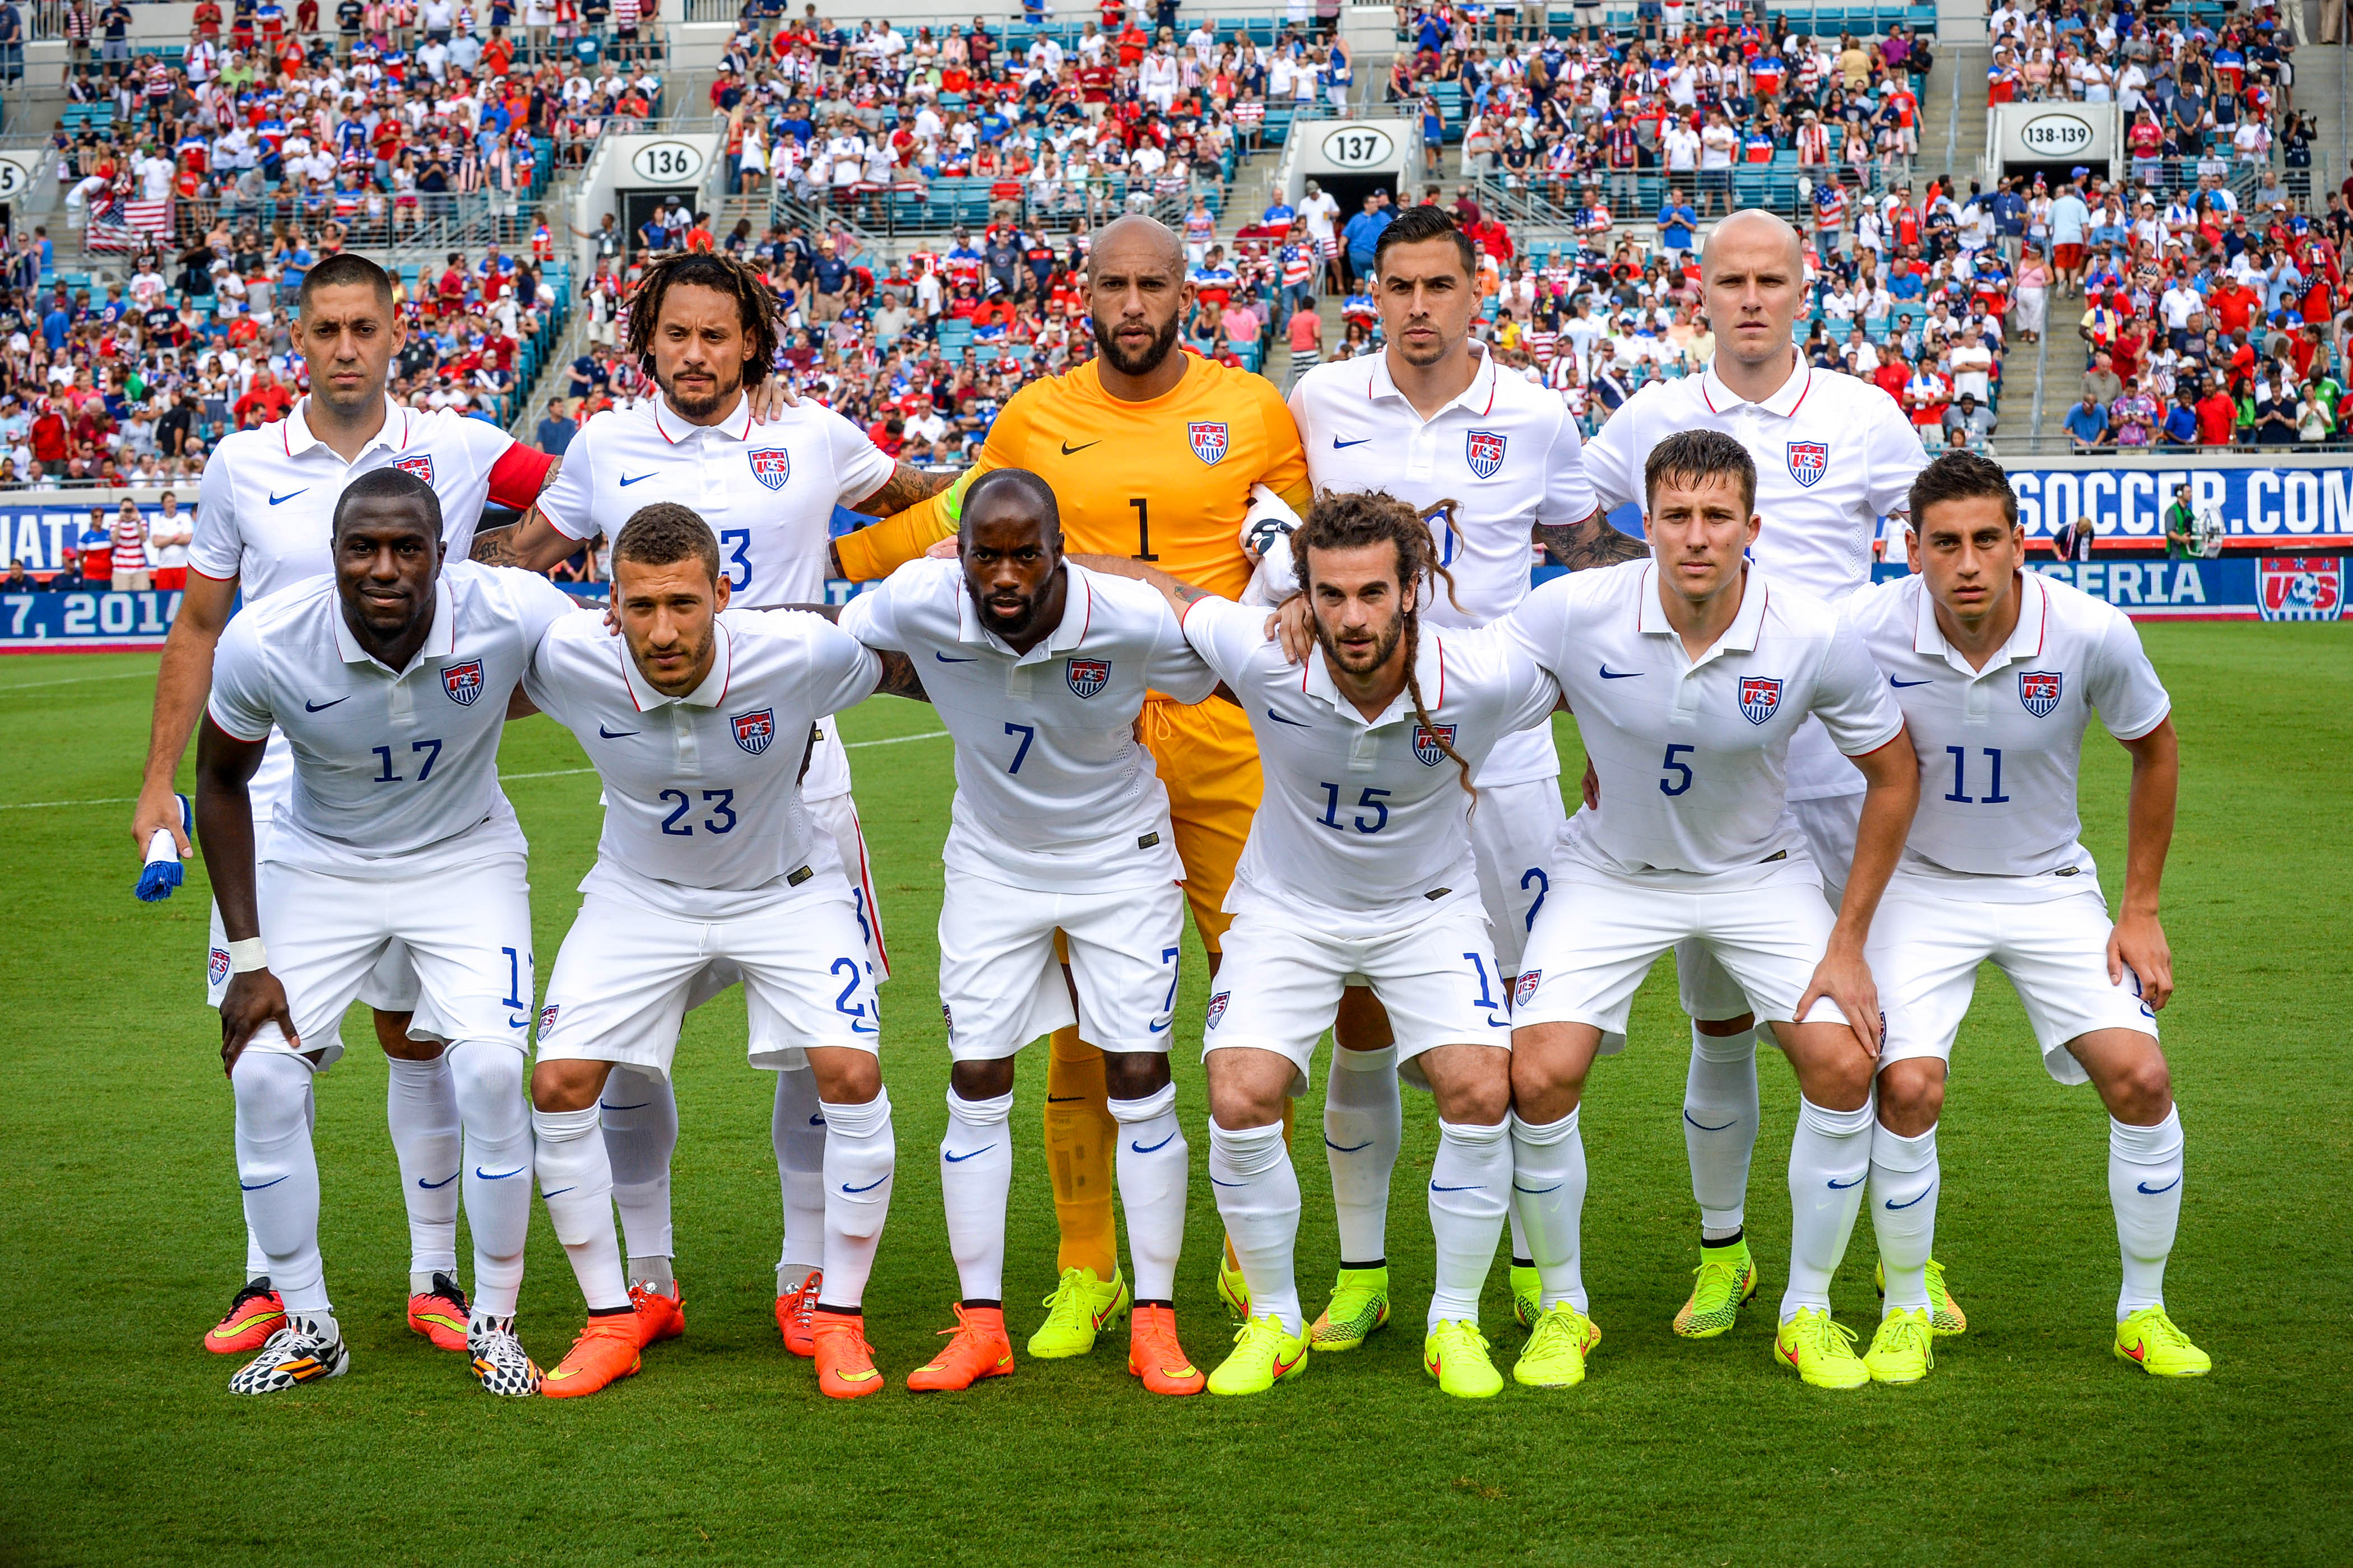 United States 2014 World Cup - HD Wallpapers
